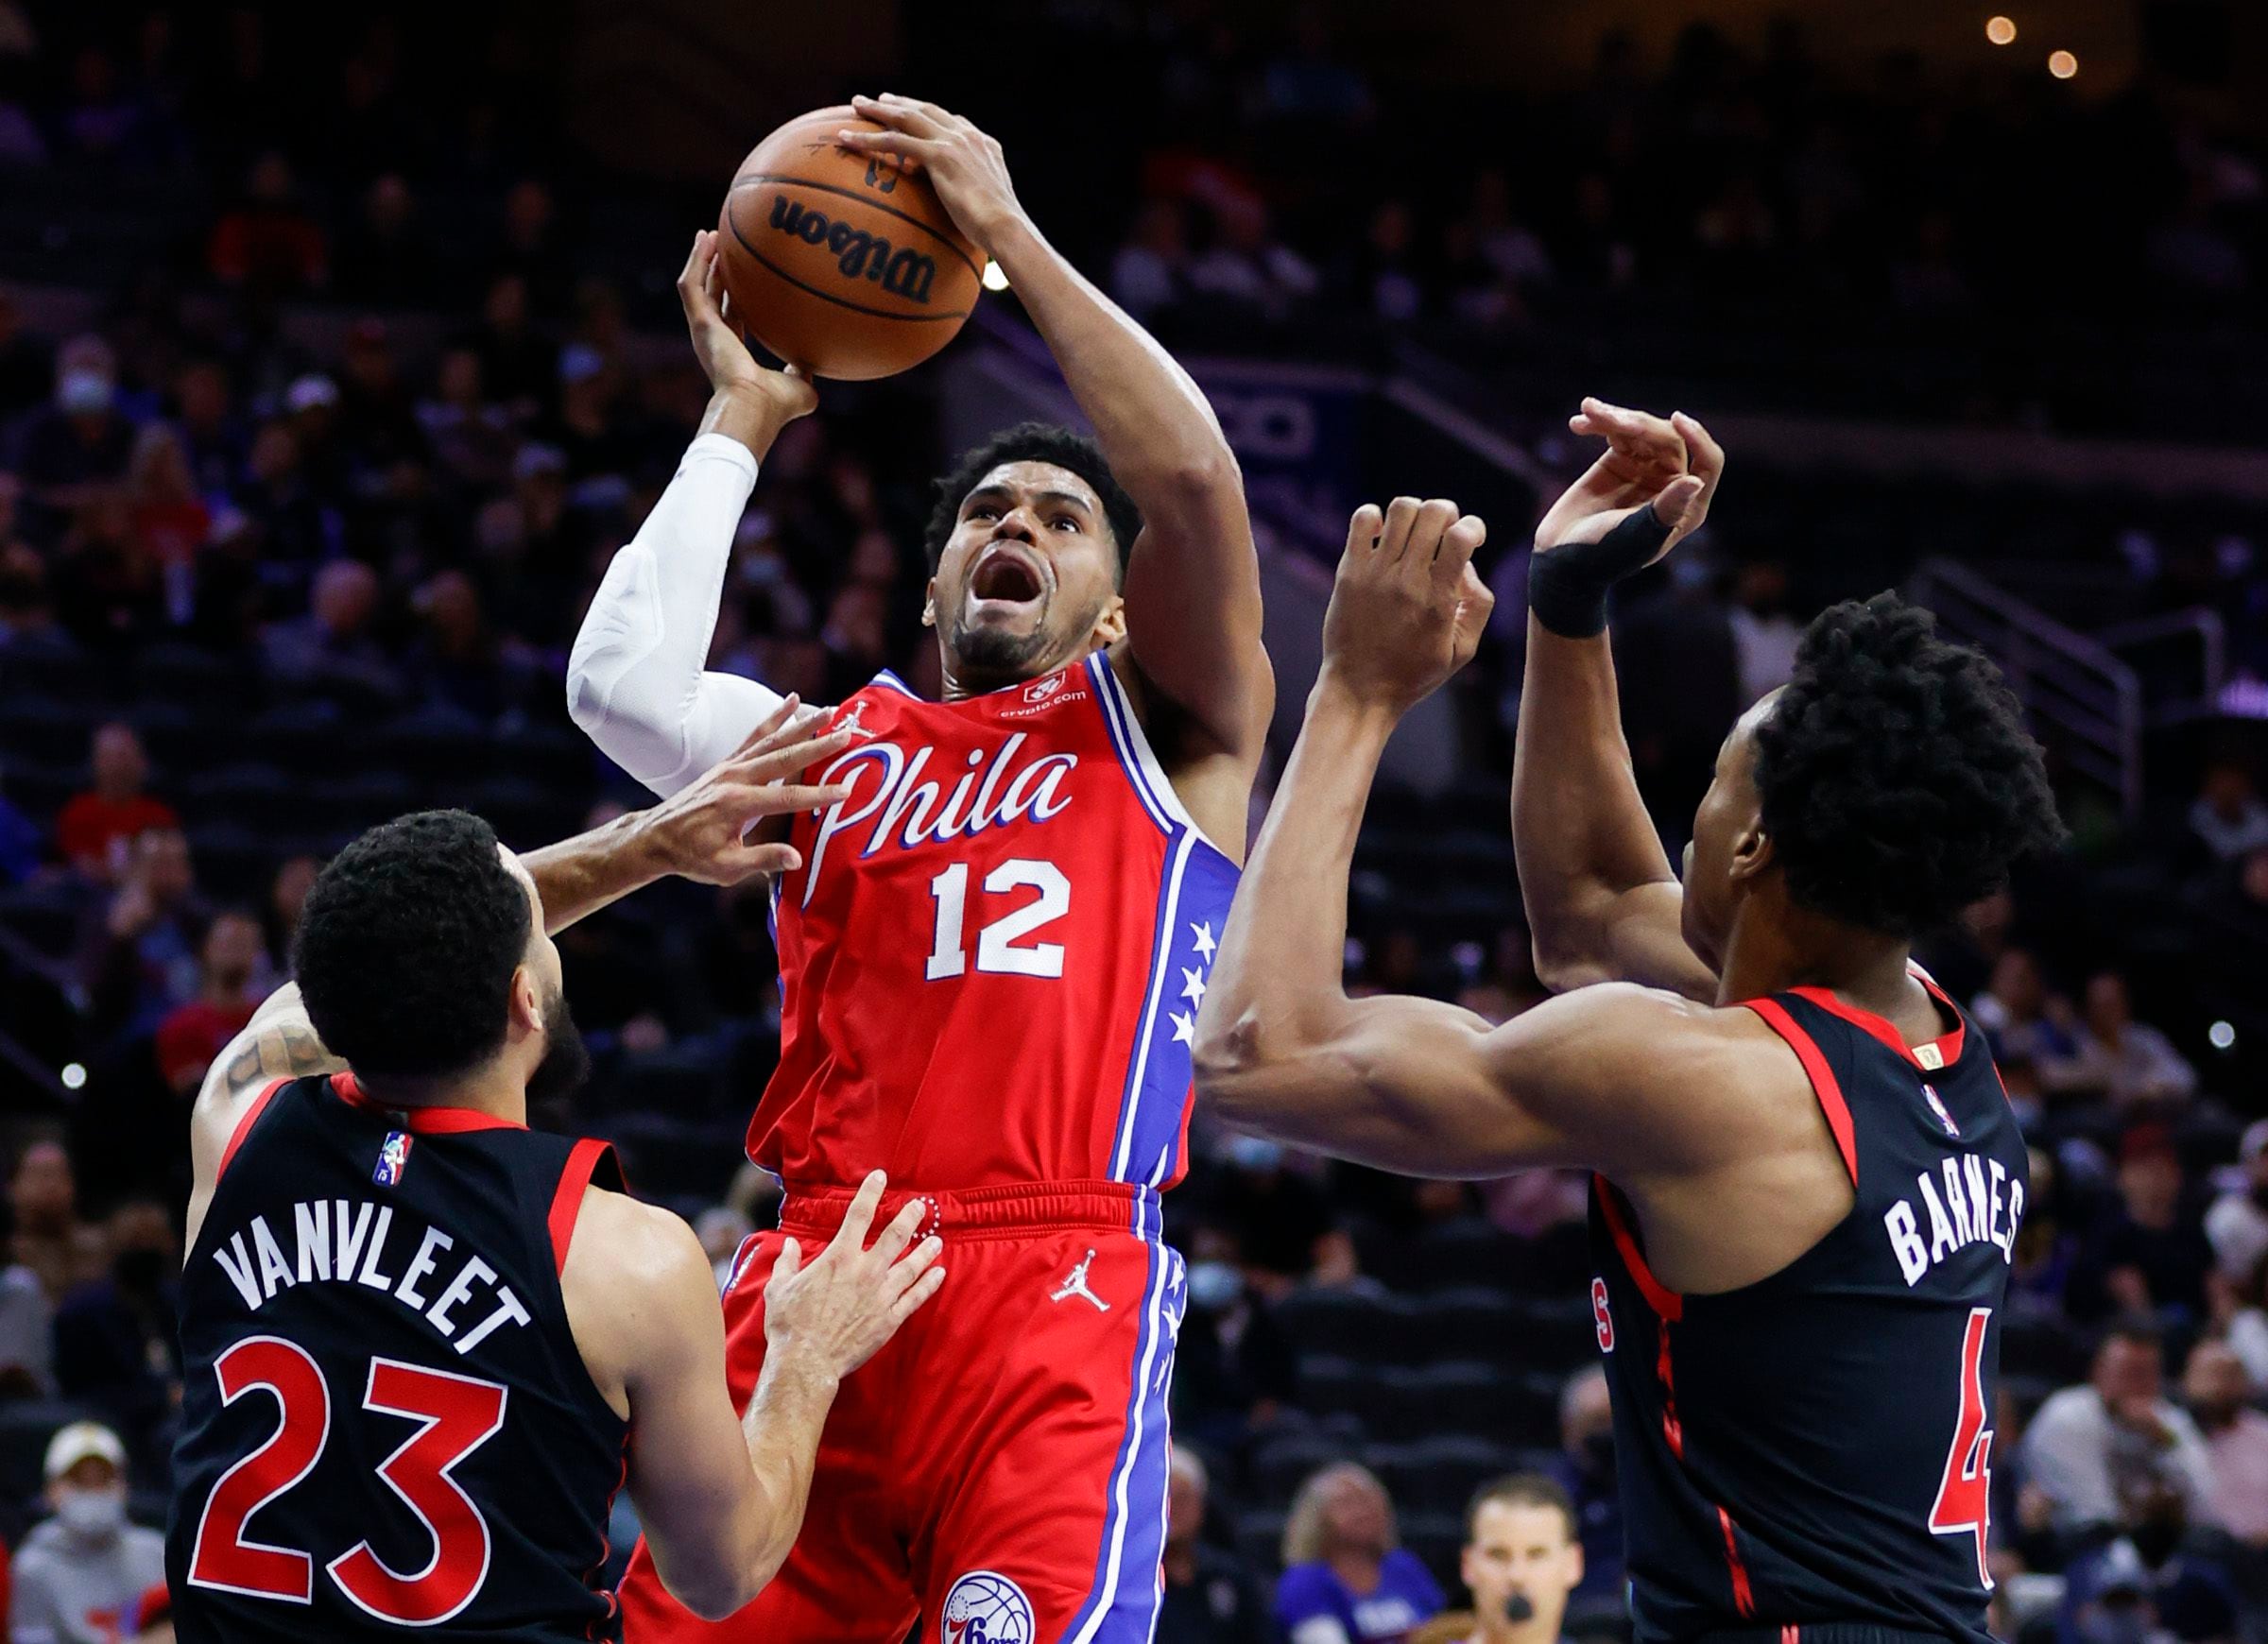 Seth Curry's 23 helps short-handed 76ers over Trail Blazers - The